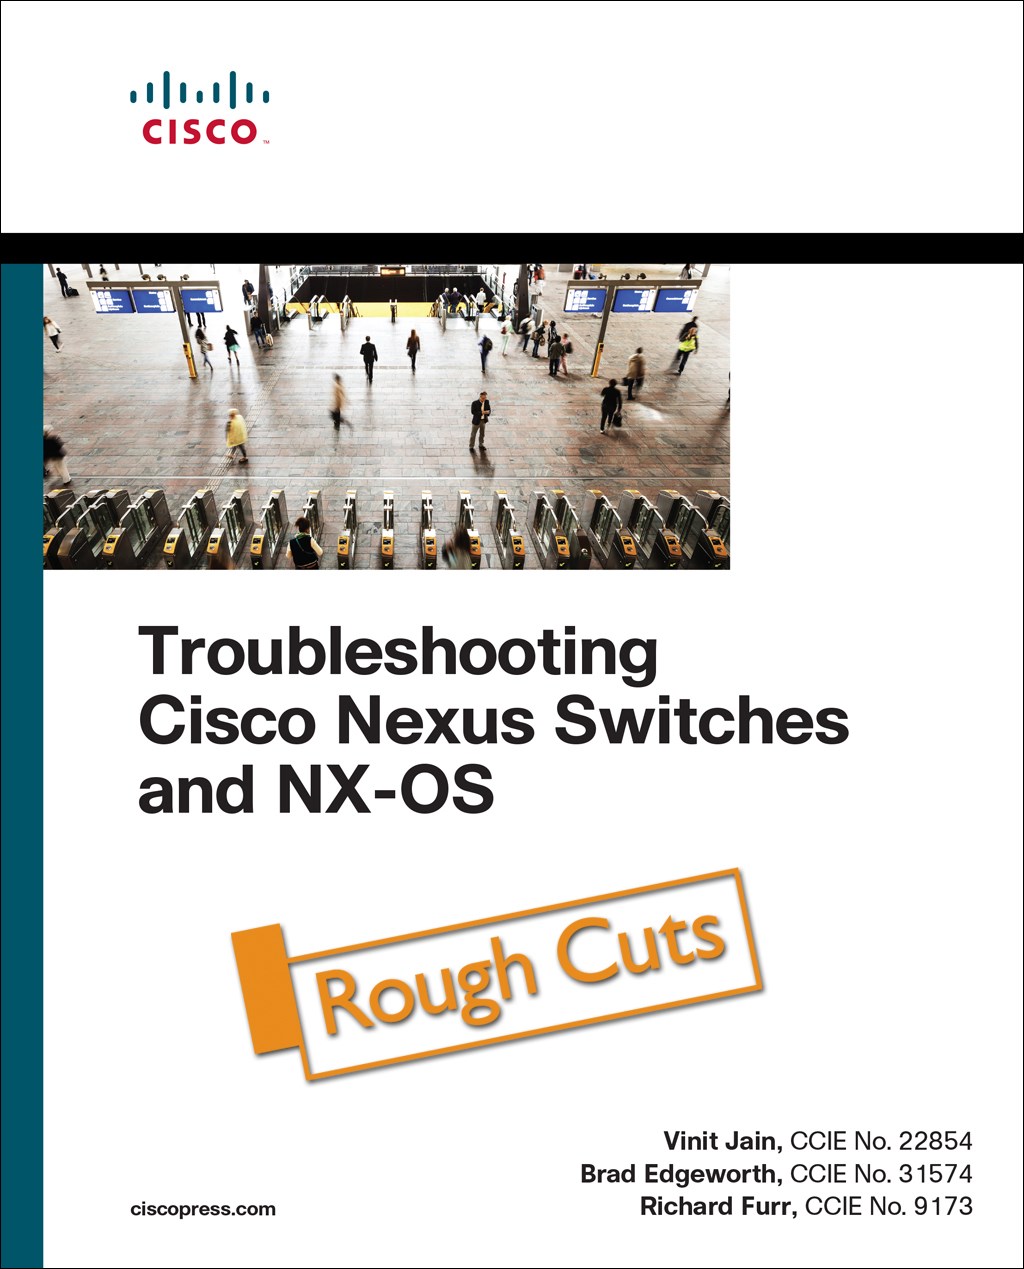 Troubleshooting Cisco Nexus Switches and NX-OS, Rough Cuts